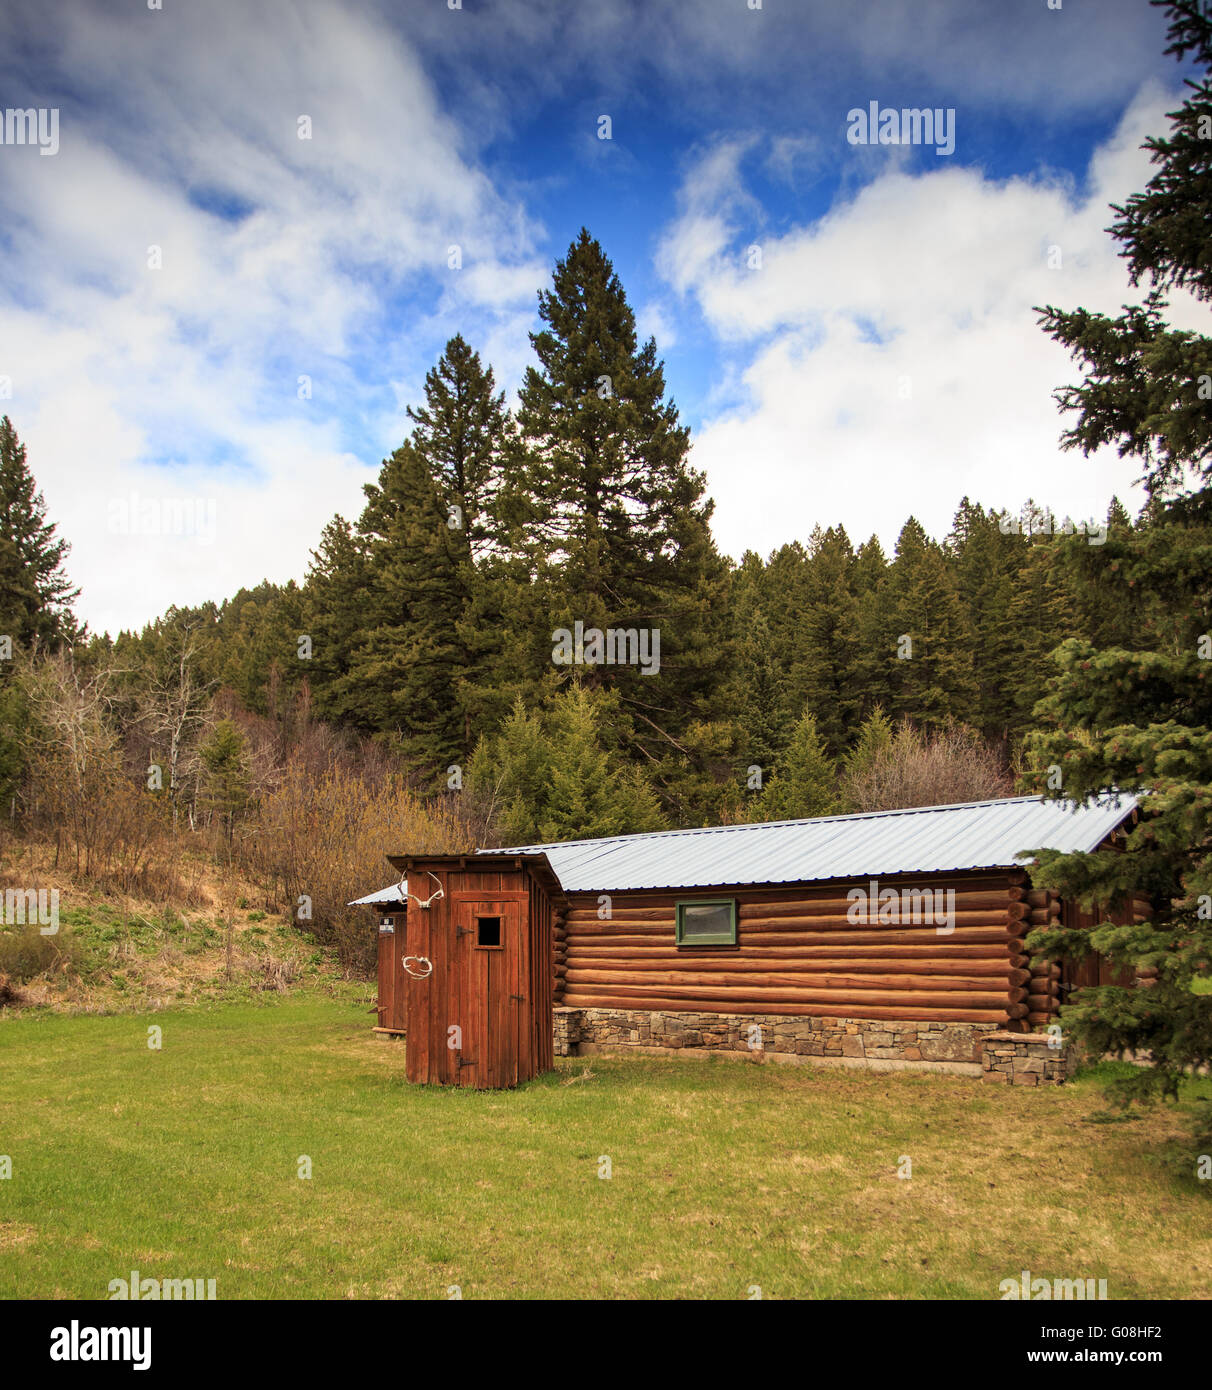 Log cabin and rustic outhouse in a forest in Montana. Stock Photo